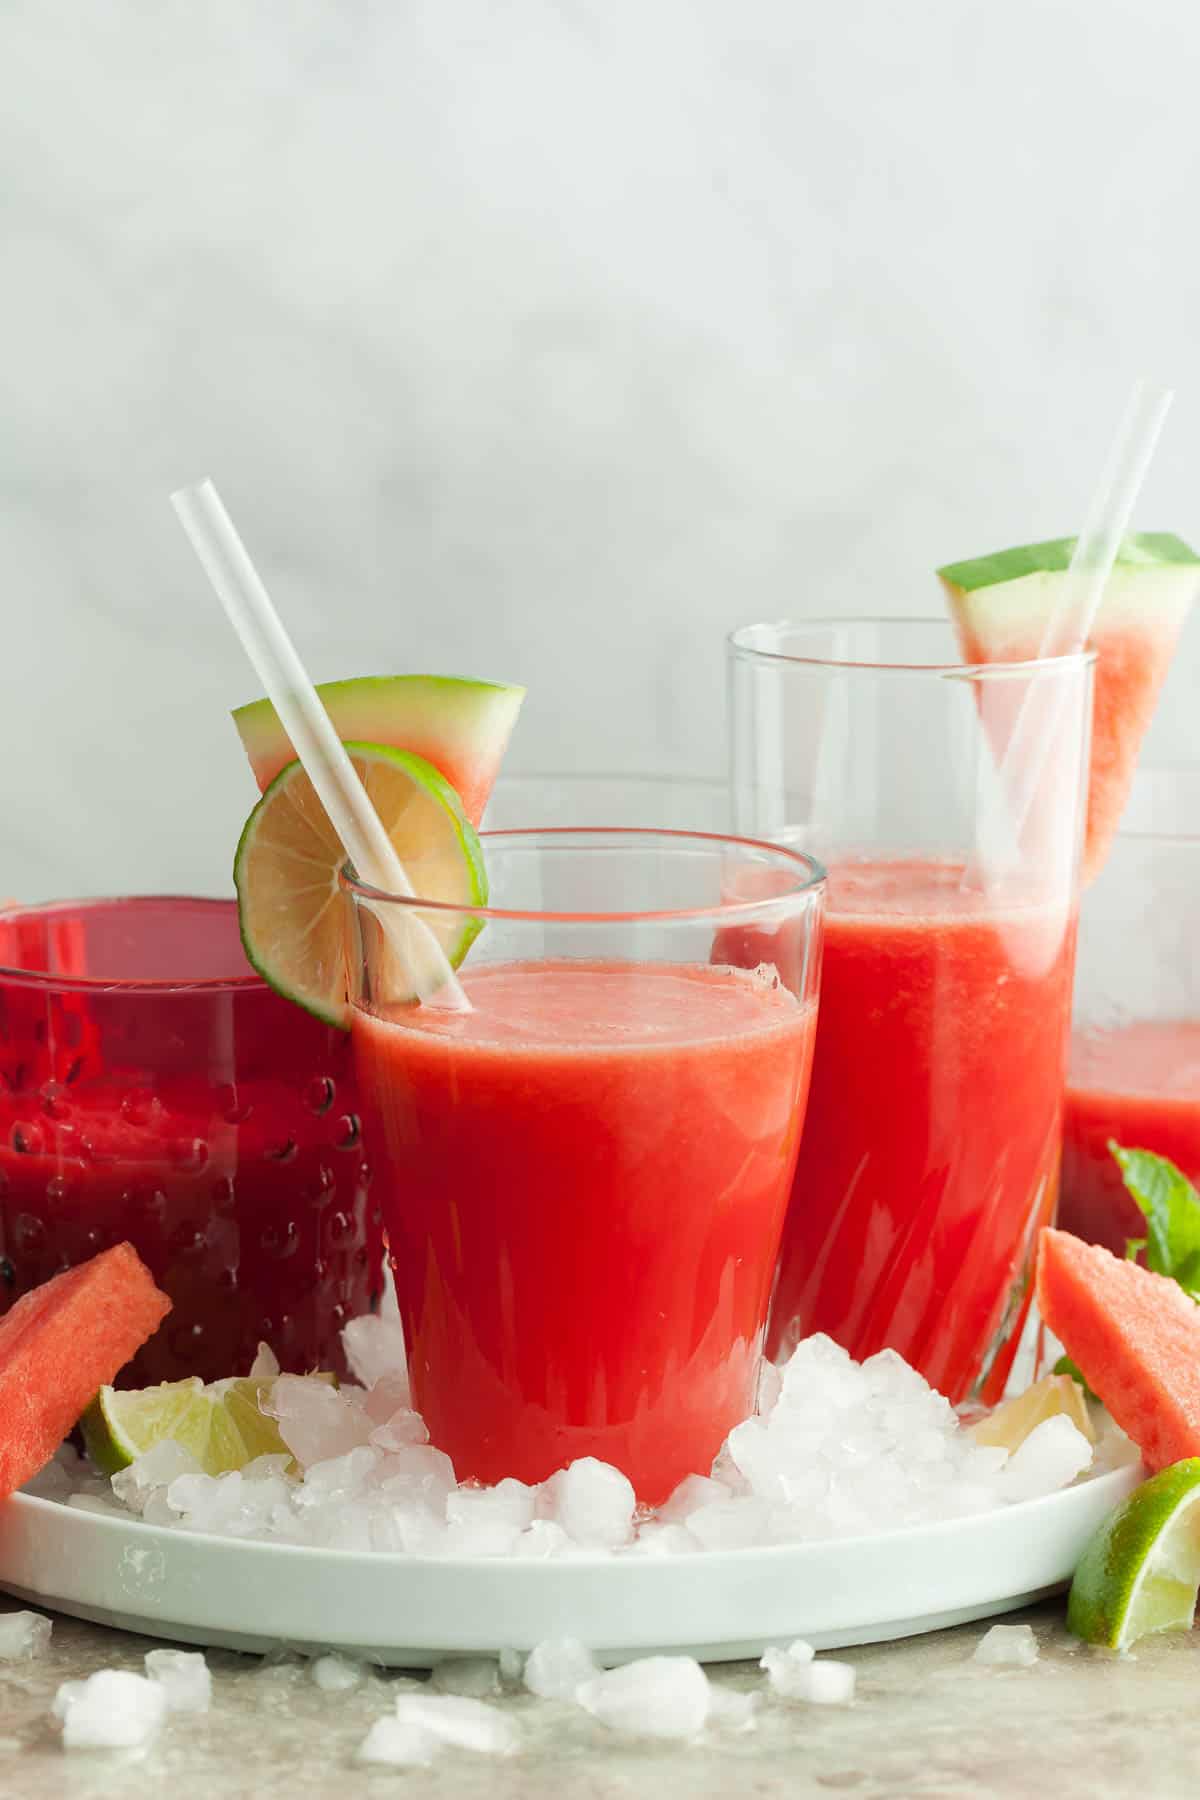 Watermelon Juice in Glasses with Straws